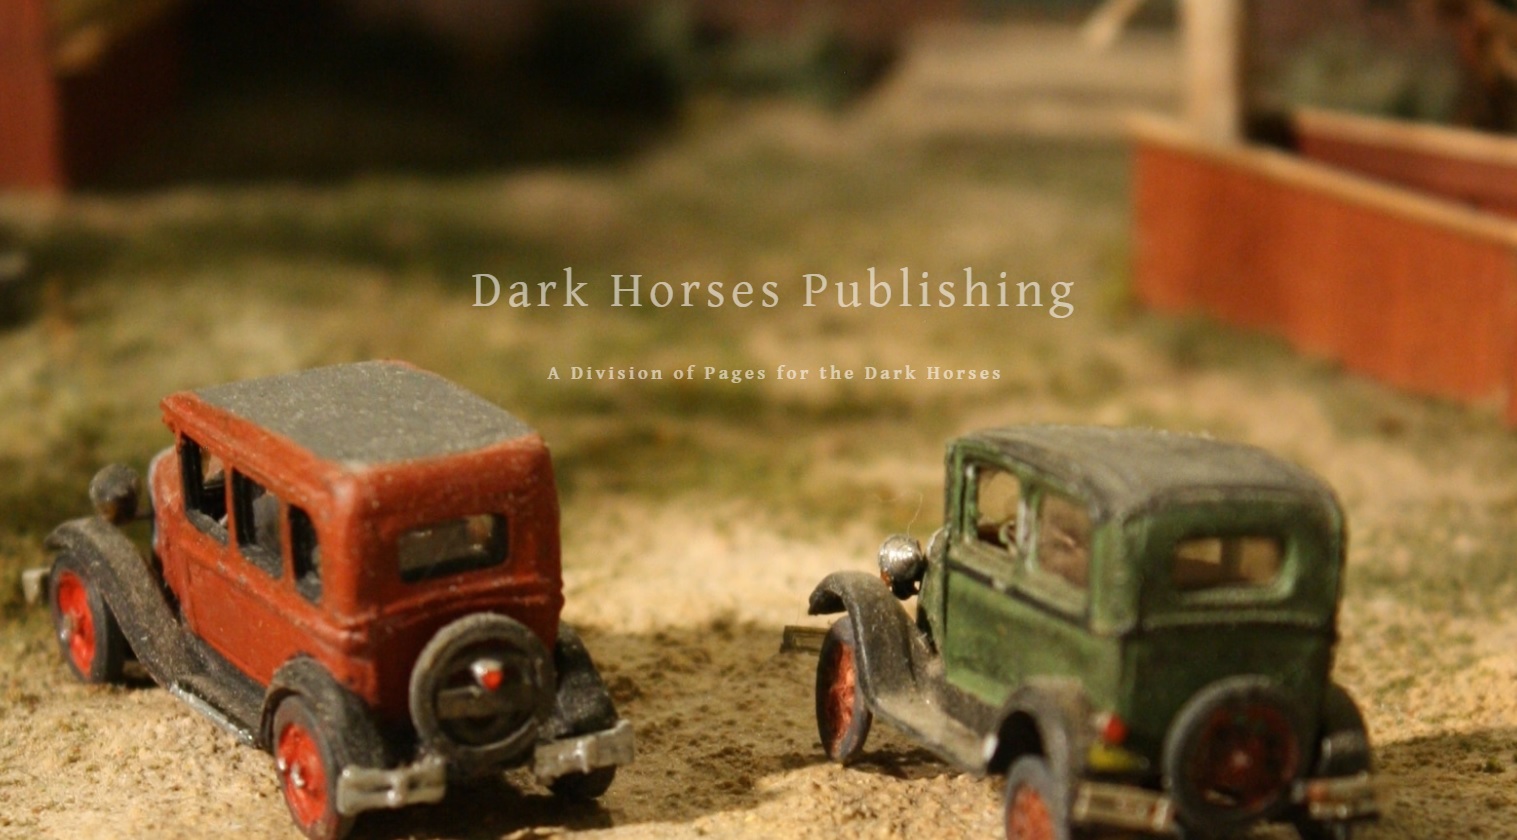 Looking for the Books? Dark Horses Publishing